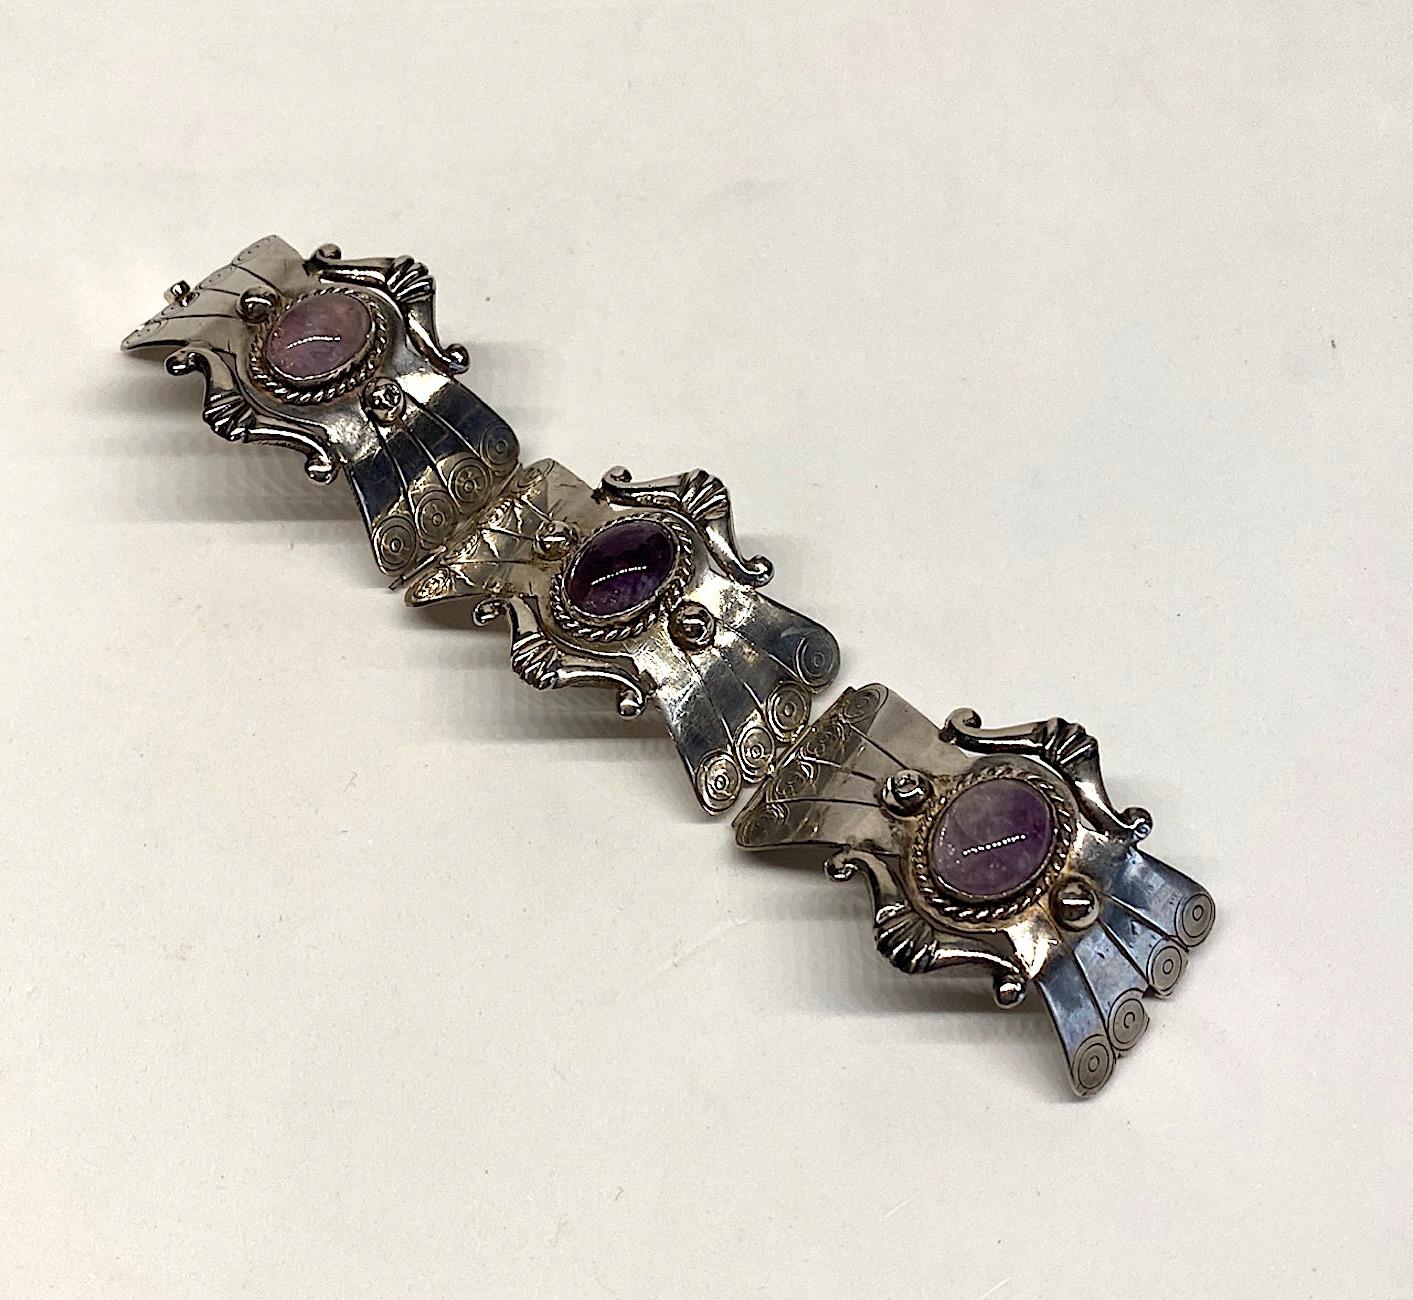 Artisan made sterling silver bracelet set with natural amethyst cabochons from the 1950s. The three curved hour glass panels are hand chased and have applied side scroll design accents and  half domes in silver. The center of each panel is bevel set